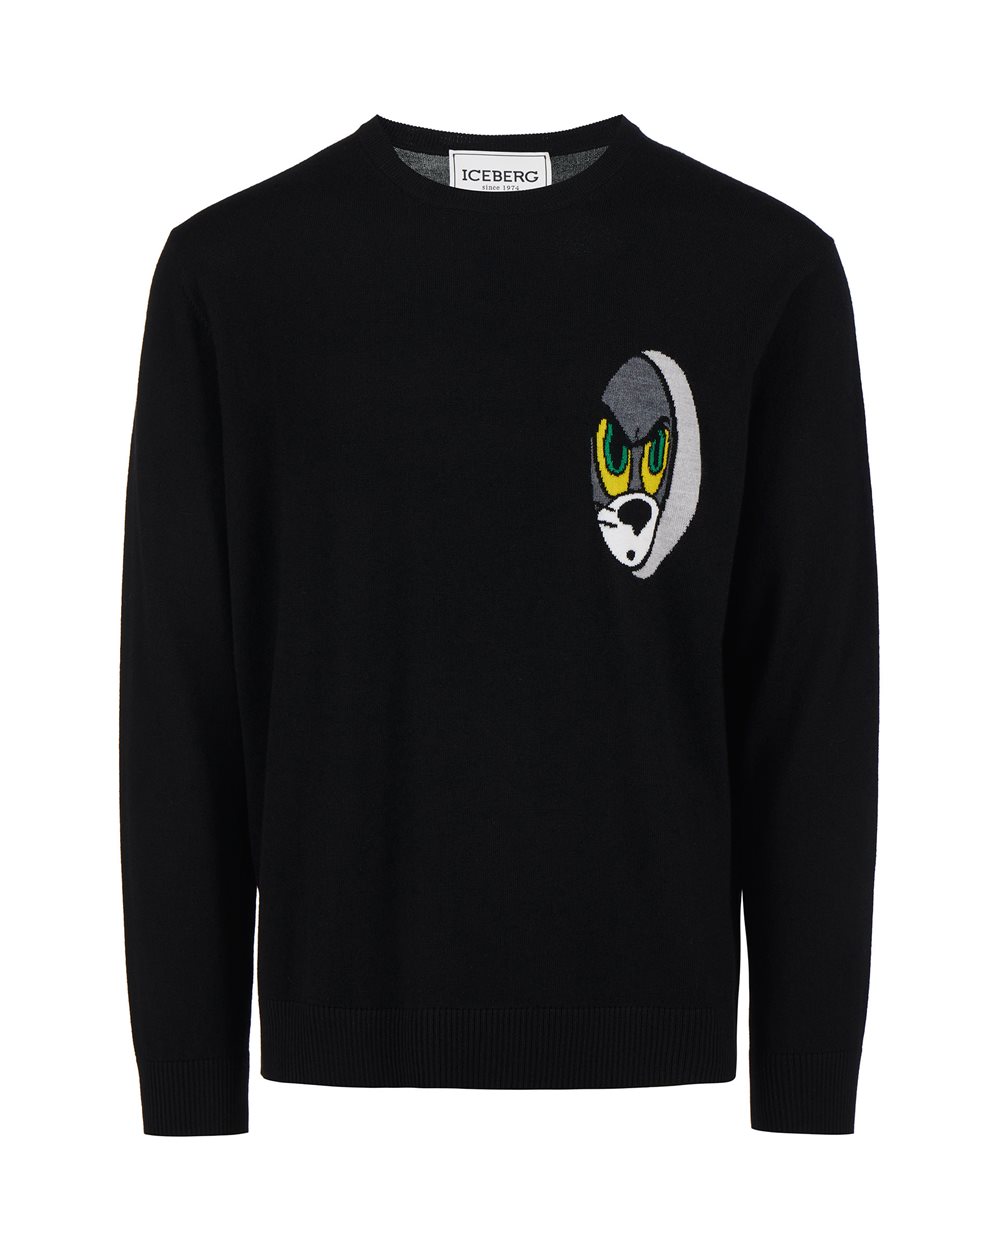 Jumper with cartoon detail and logo - PER FARE LE REGOLE | Iceberg - Official Website